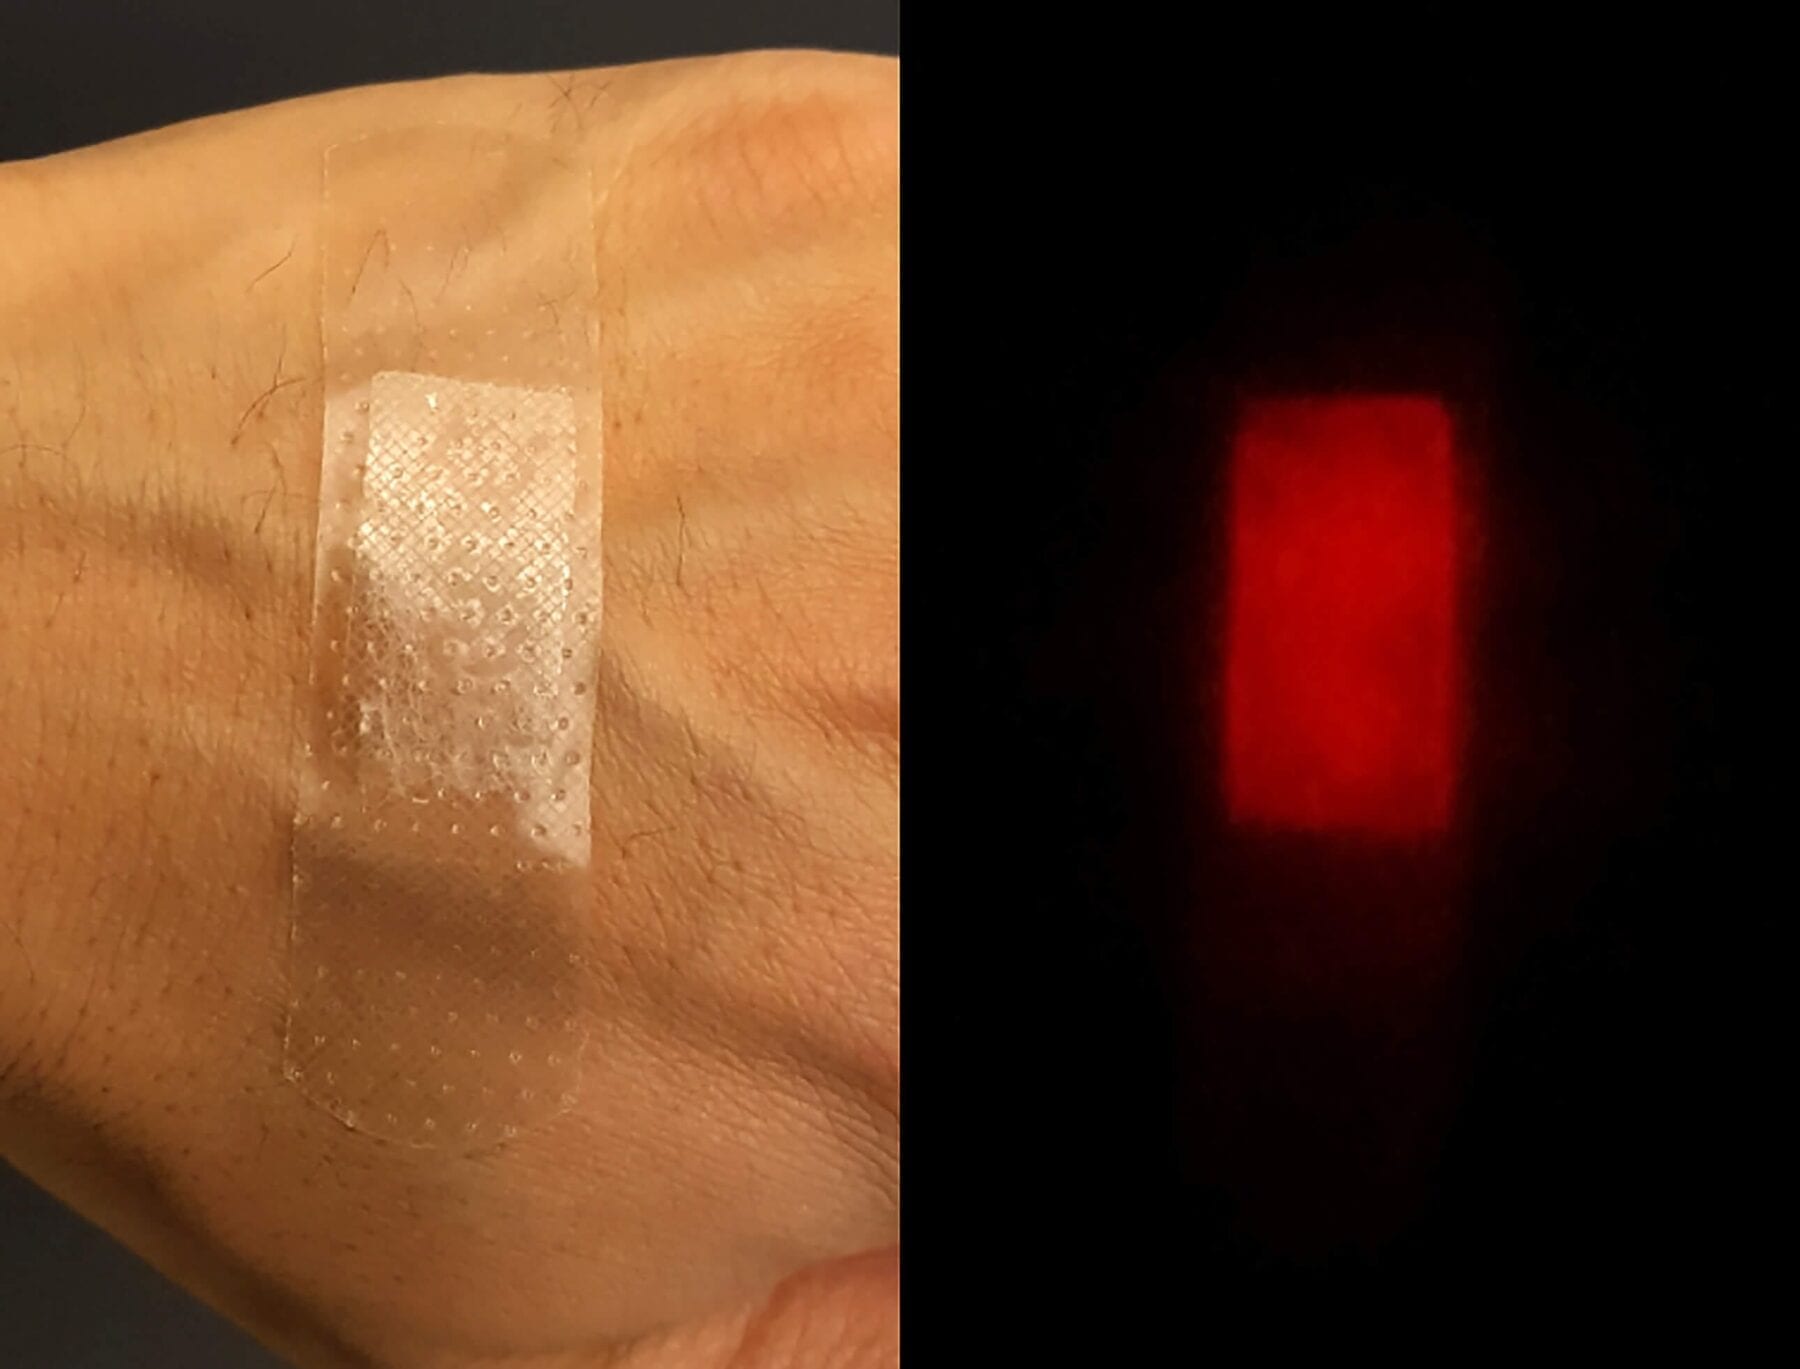 Fluorescent silk as an implantable and injectable wound healing material